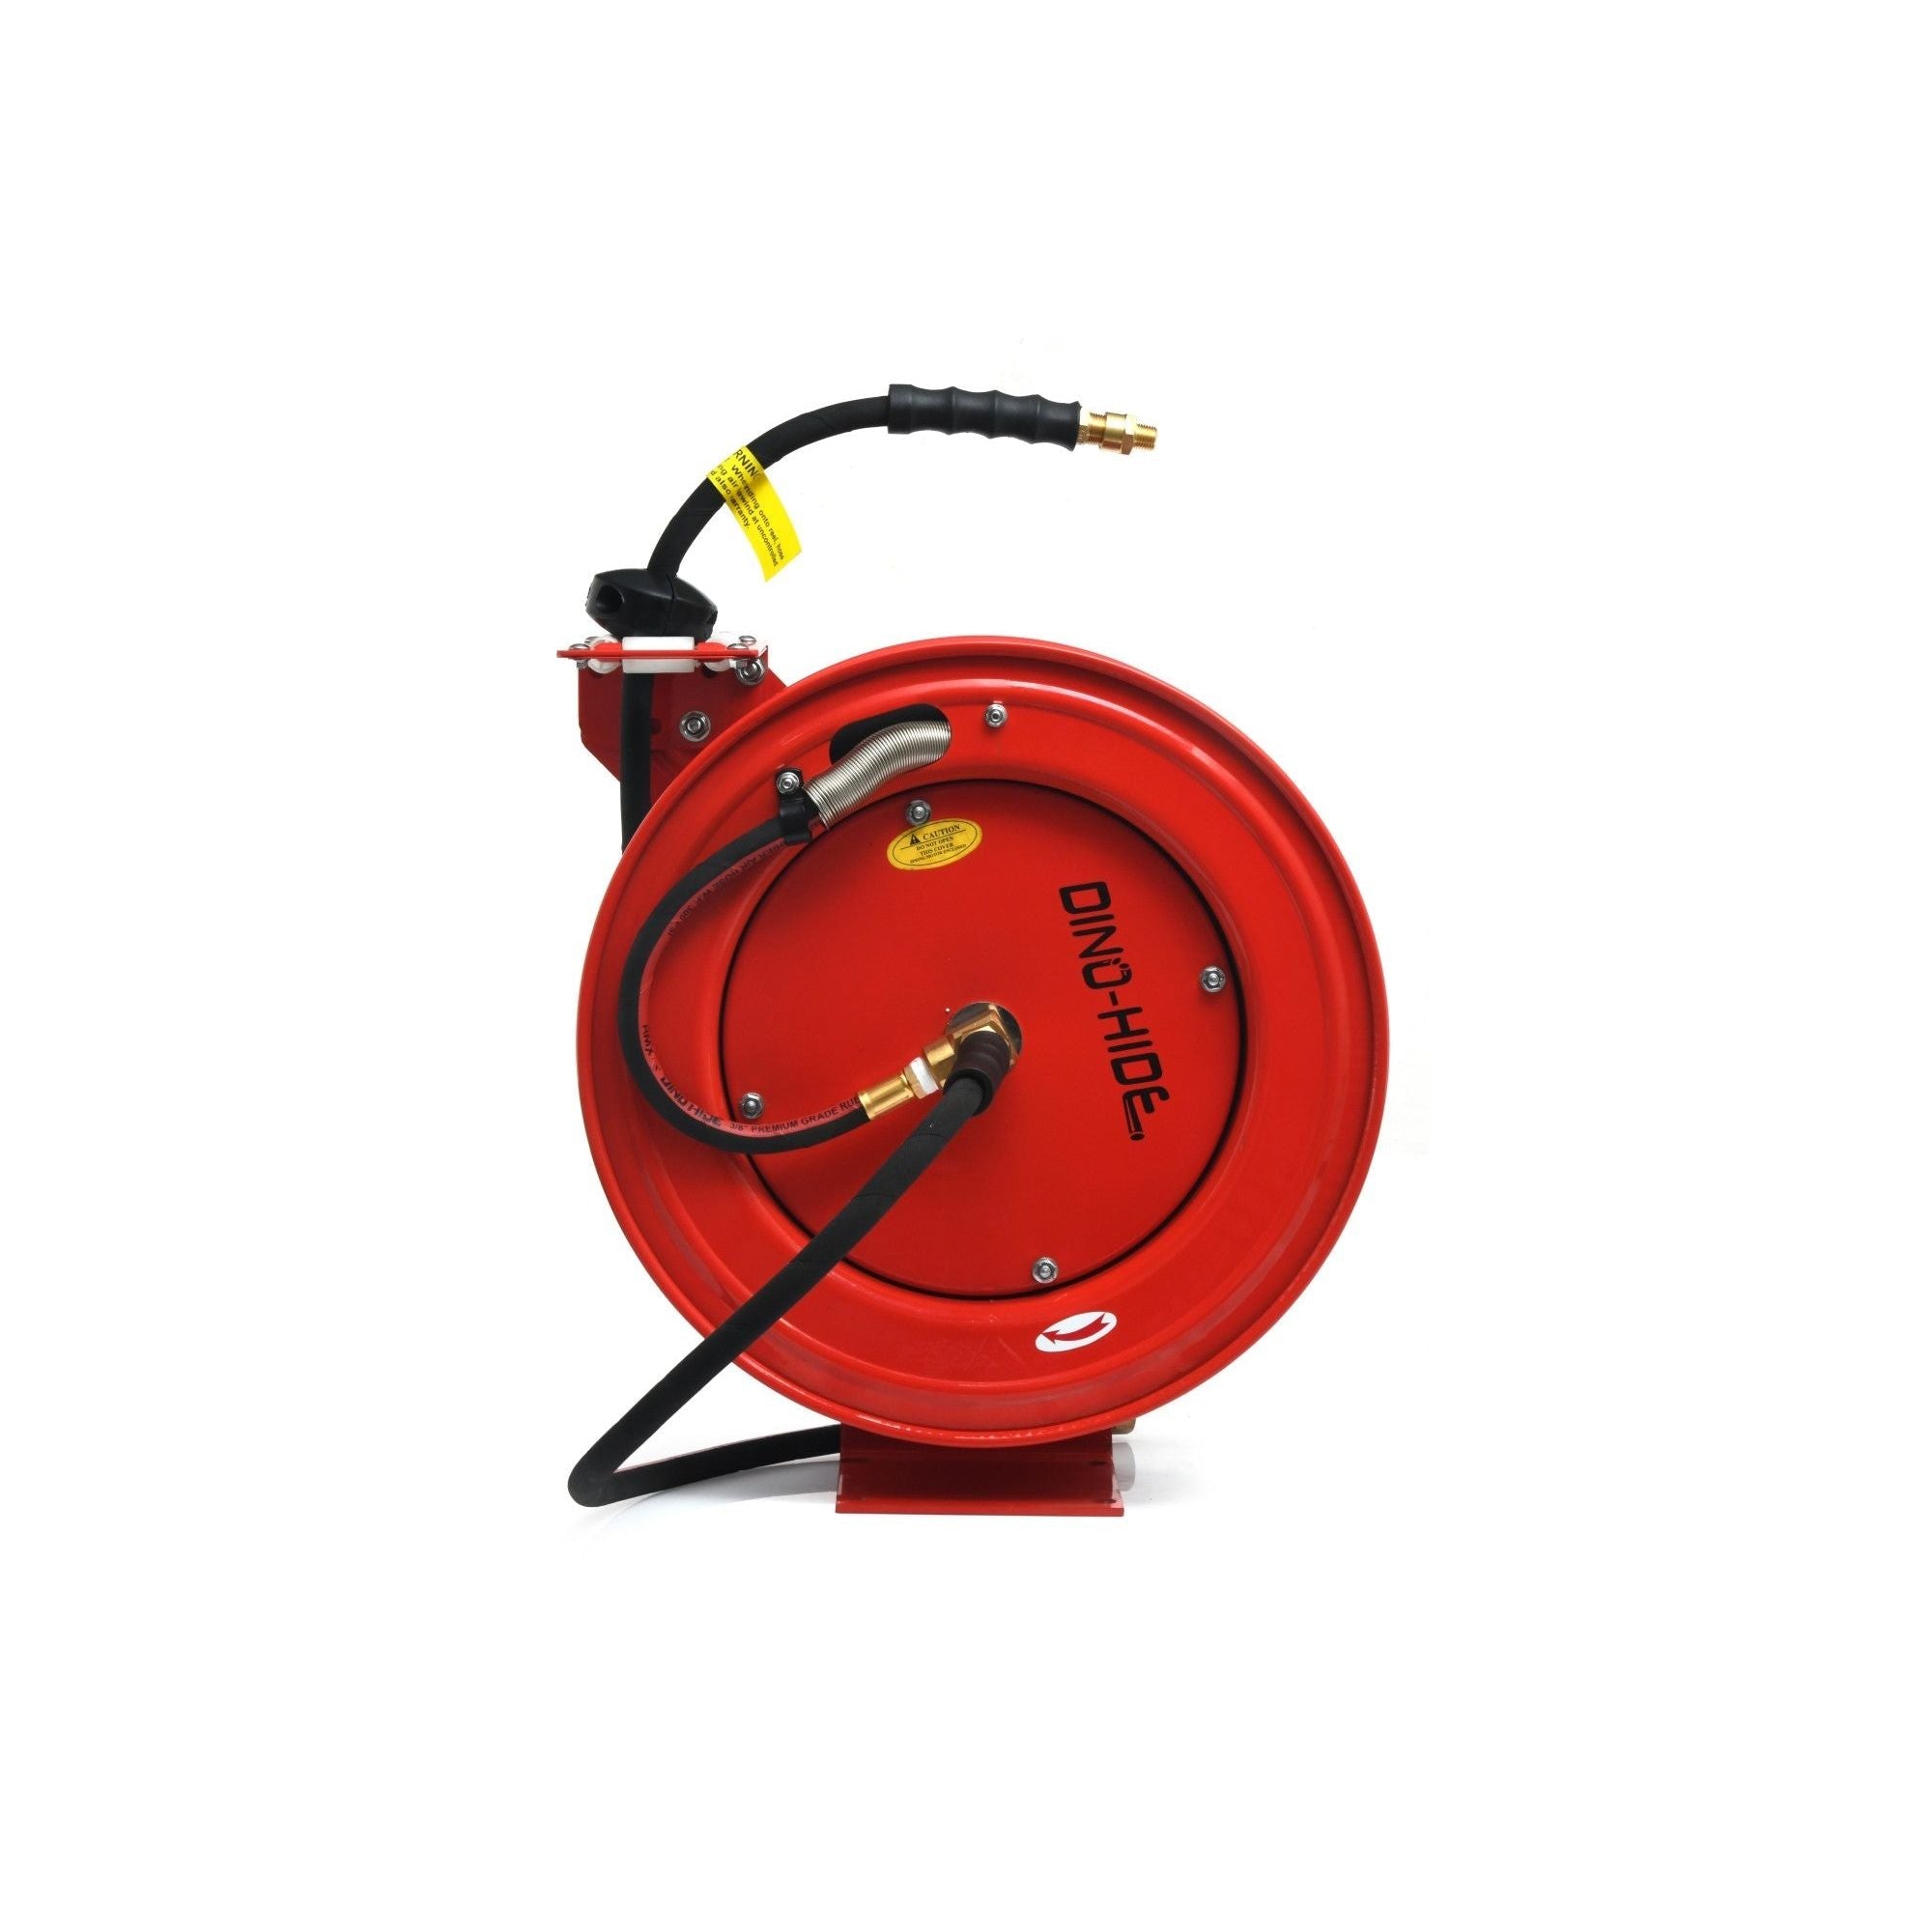 Air Hose Reel Retractable Spring Driven Polypropylene Heavy Duty Industrial  10M Long Premium Commercial Hybrid Polymer Hose for Indoor Outdoor Use